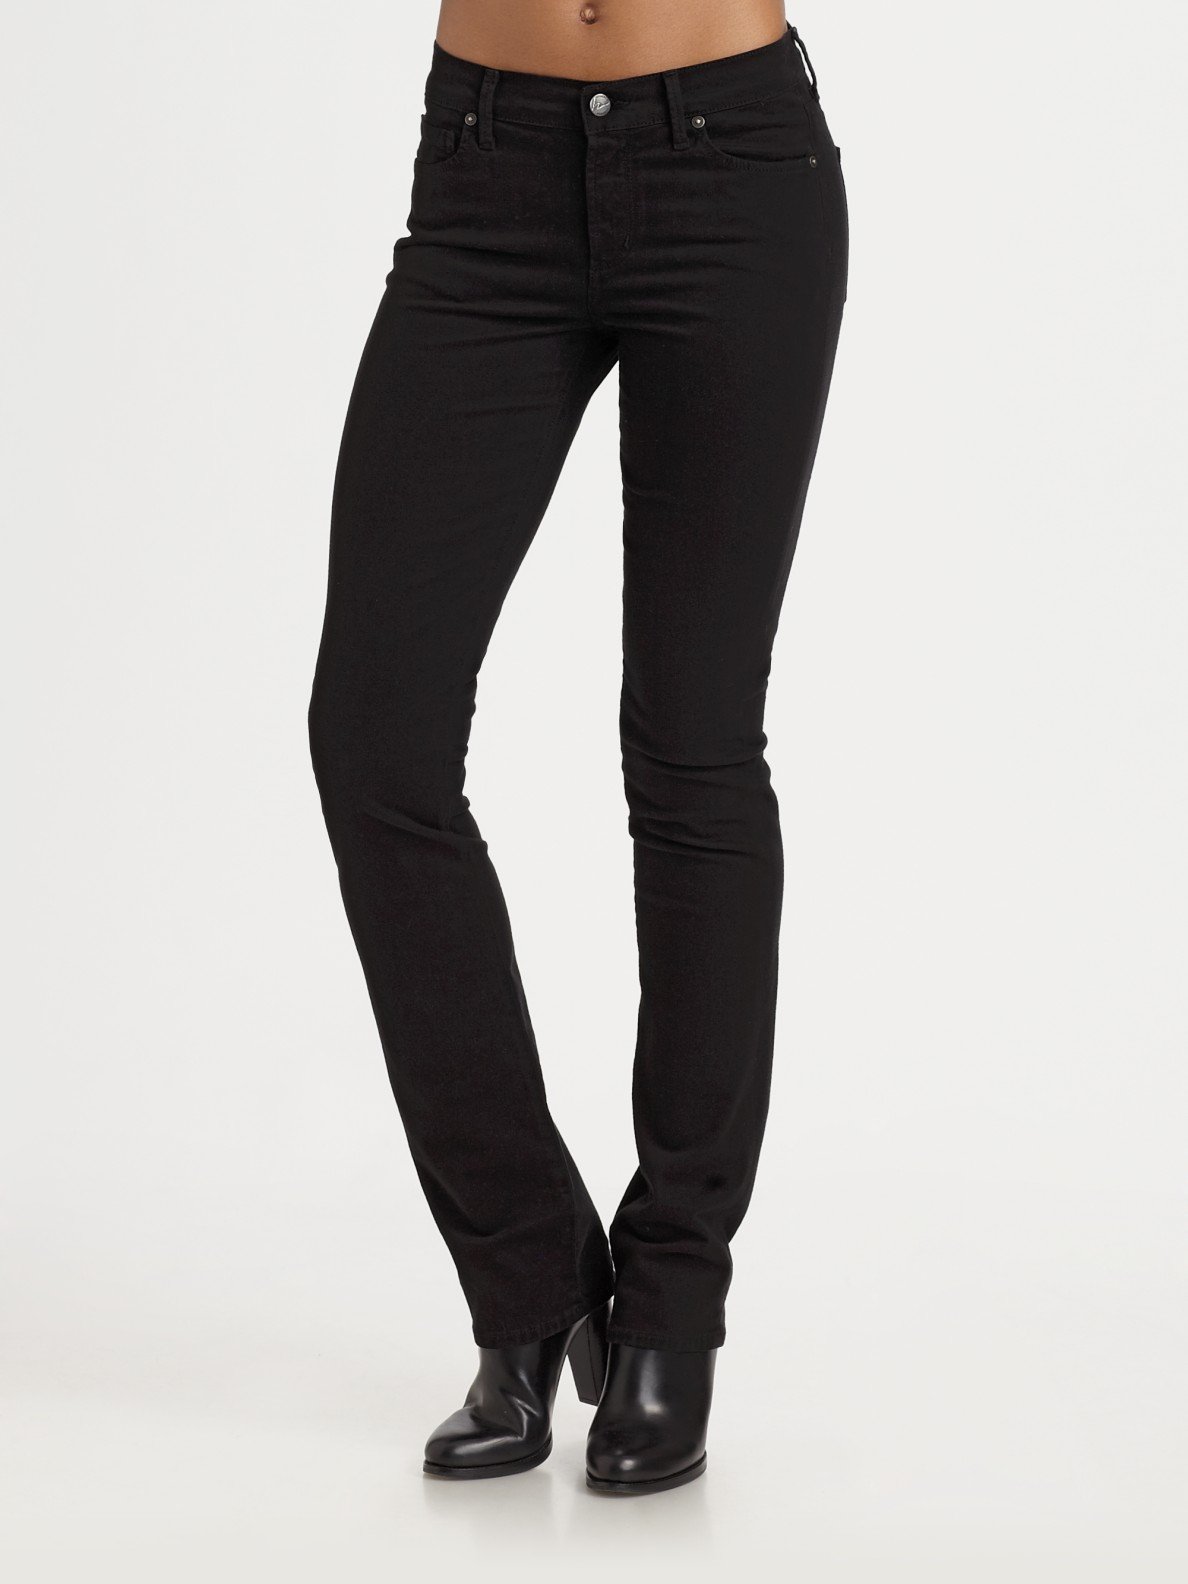 Citizens of Humanity Elson Medium Rise Straight-Leg Jeans in Black - Lyst